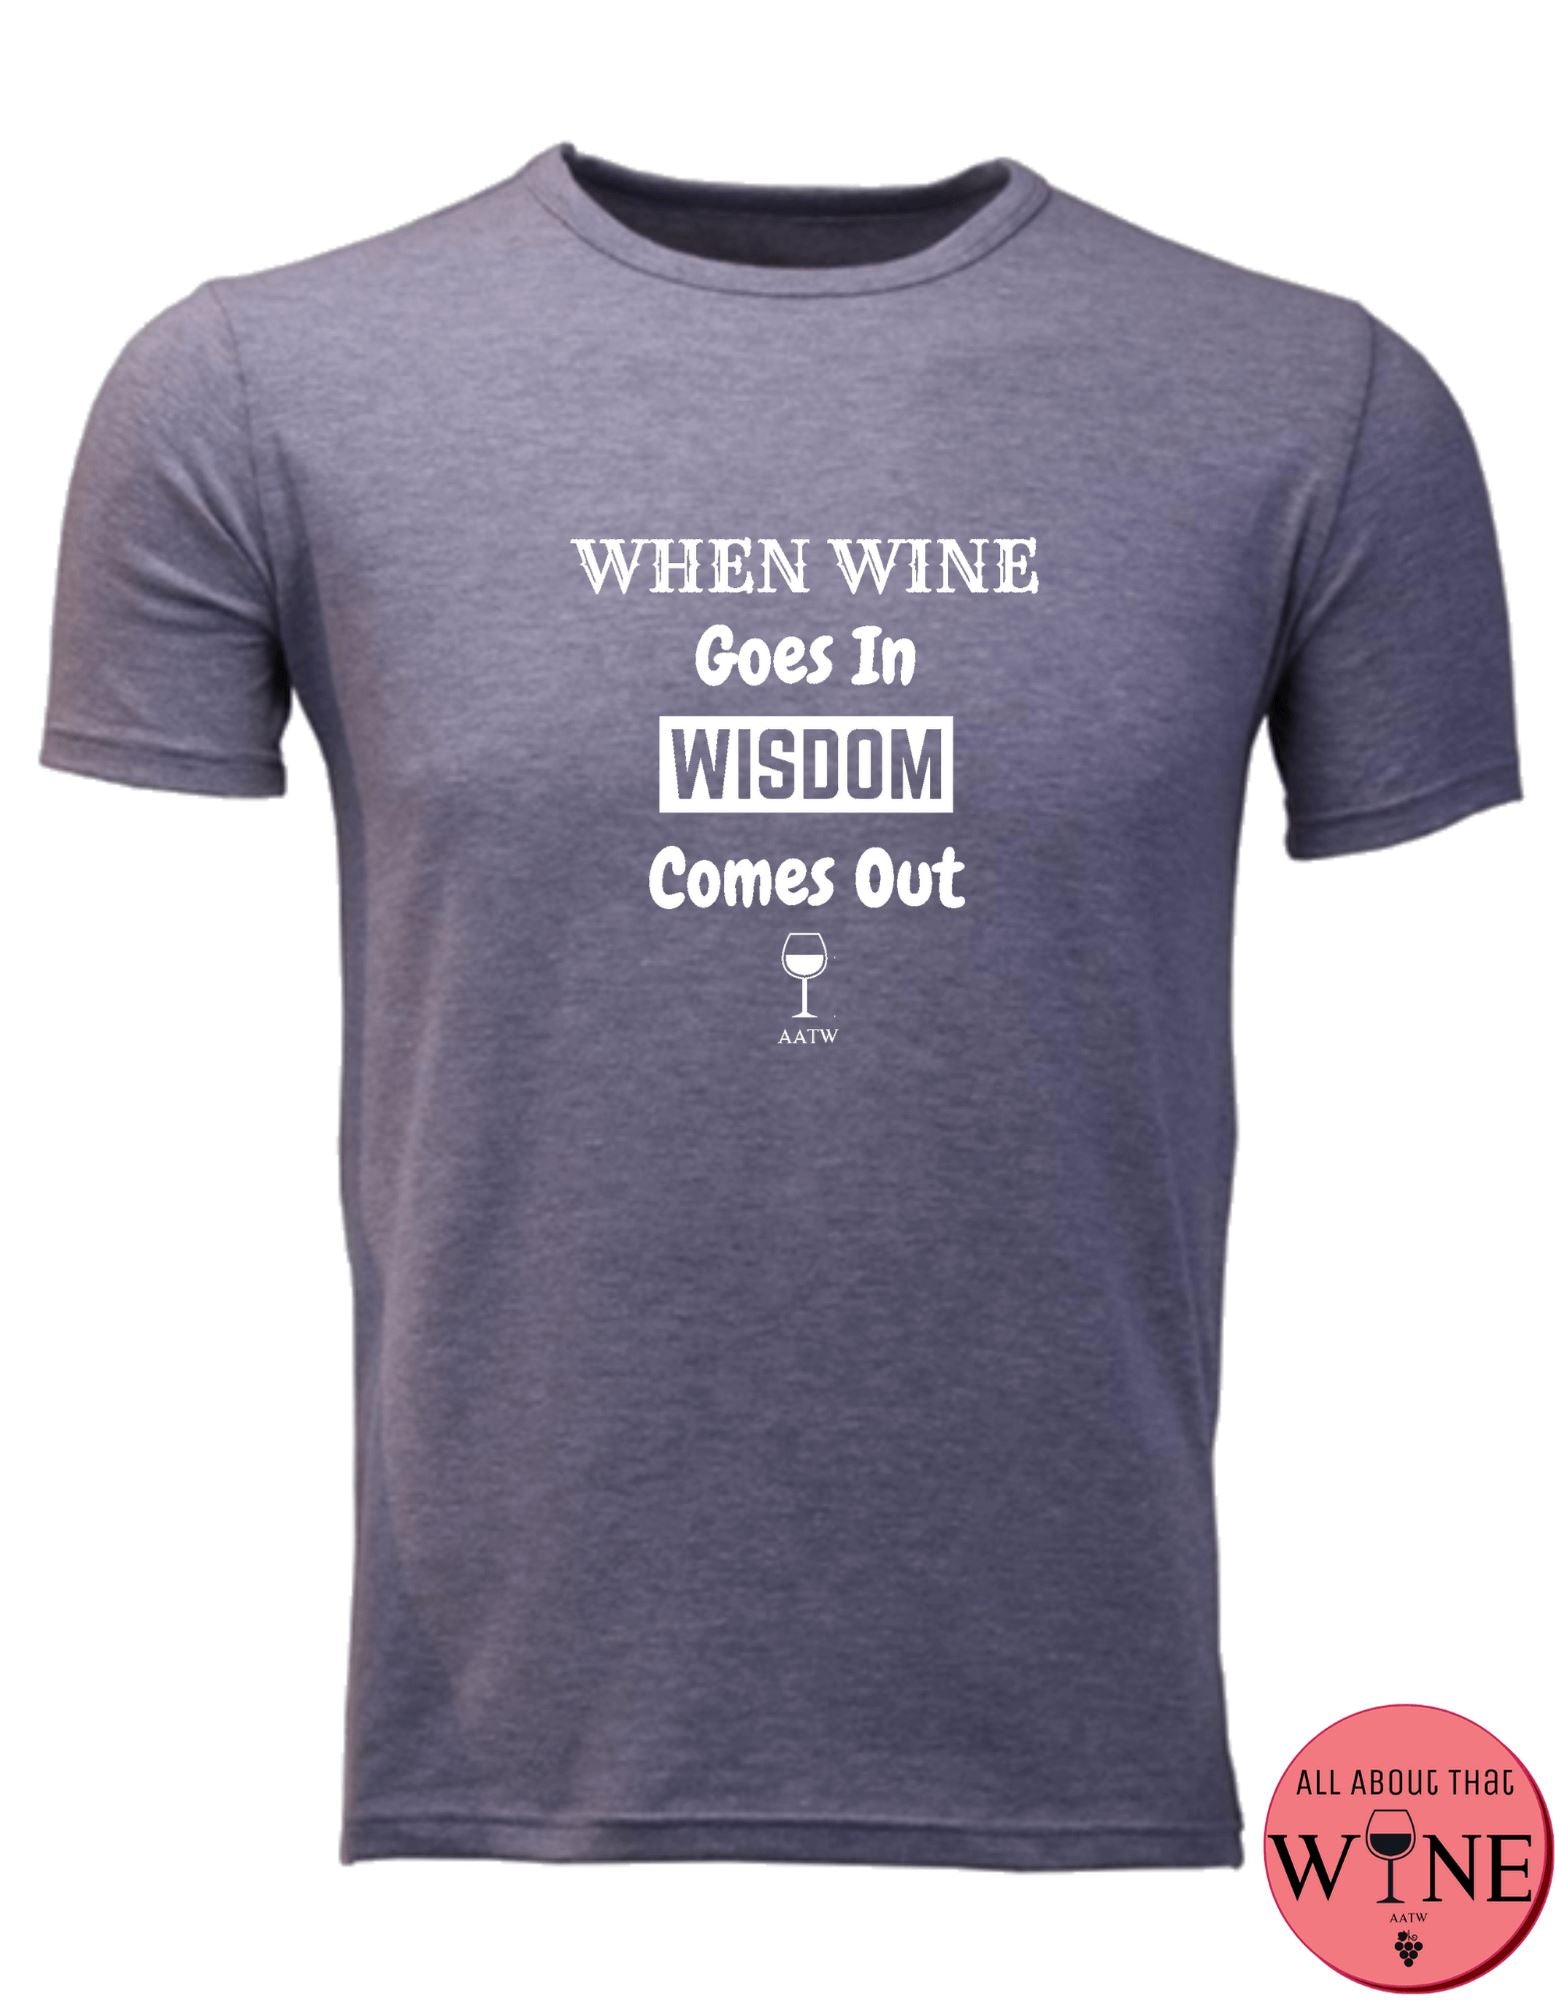 When Wine Goes In - Unisex/Male M Grey melange with white